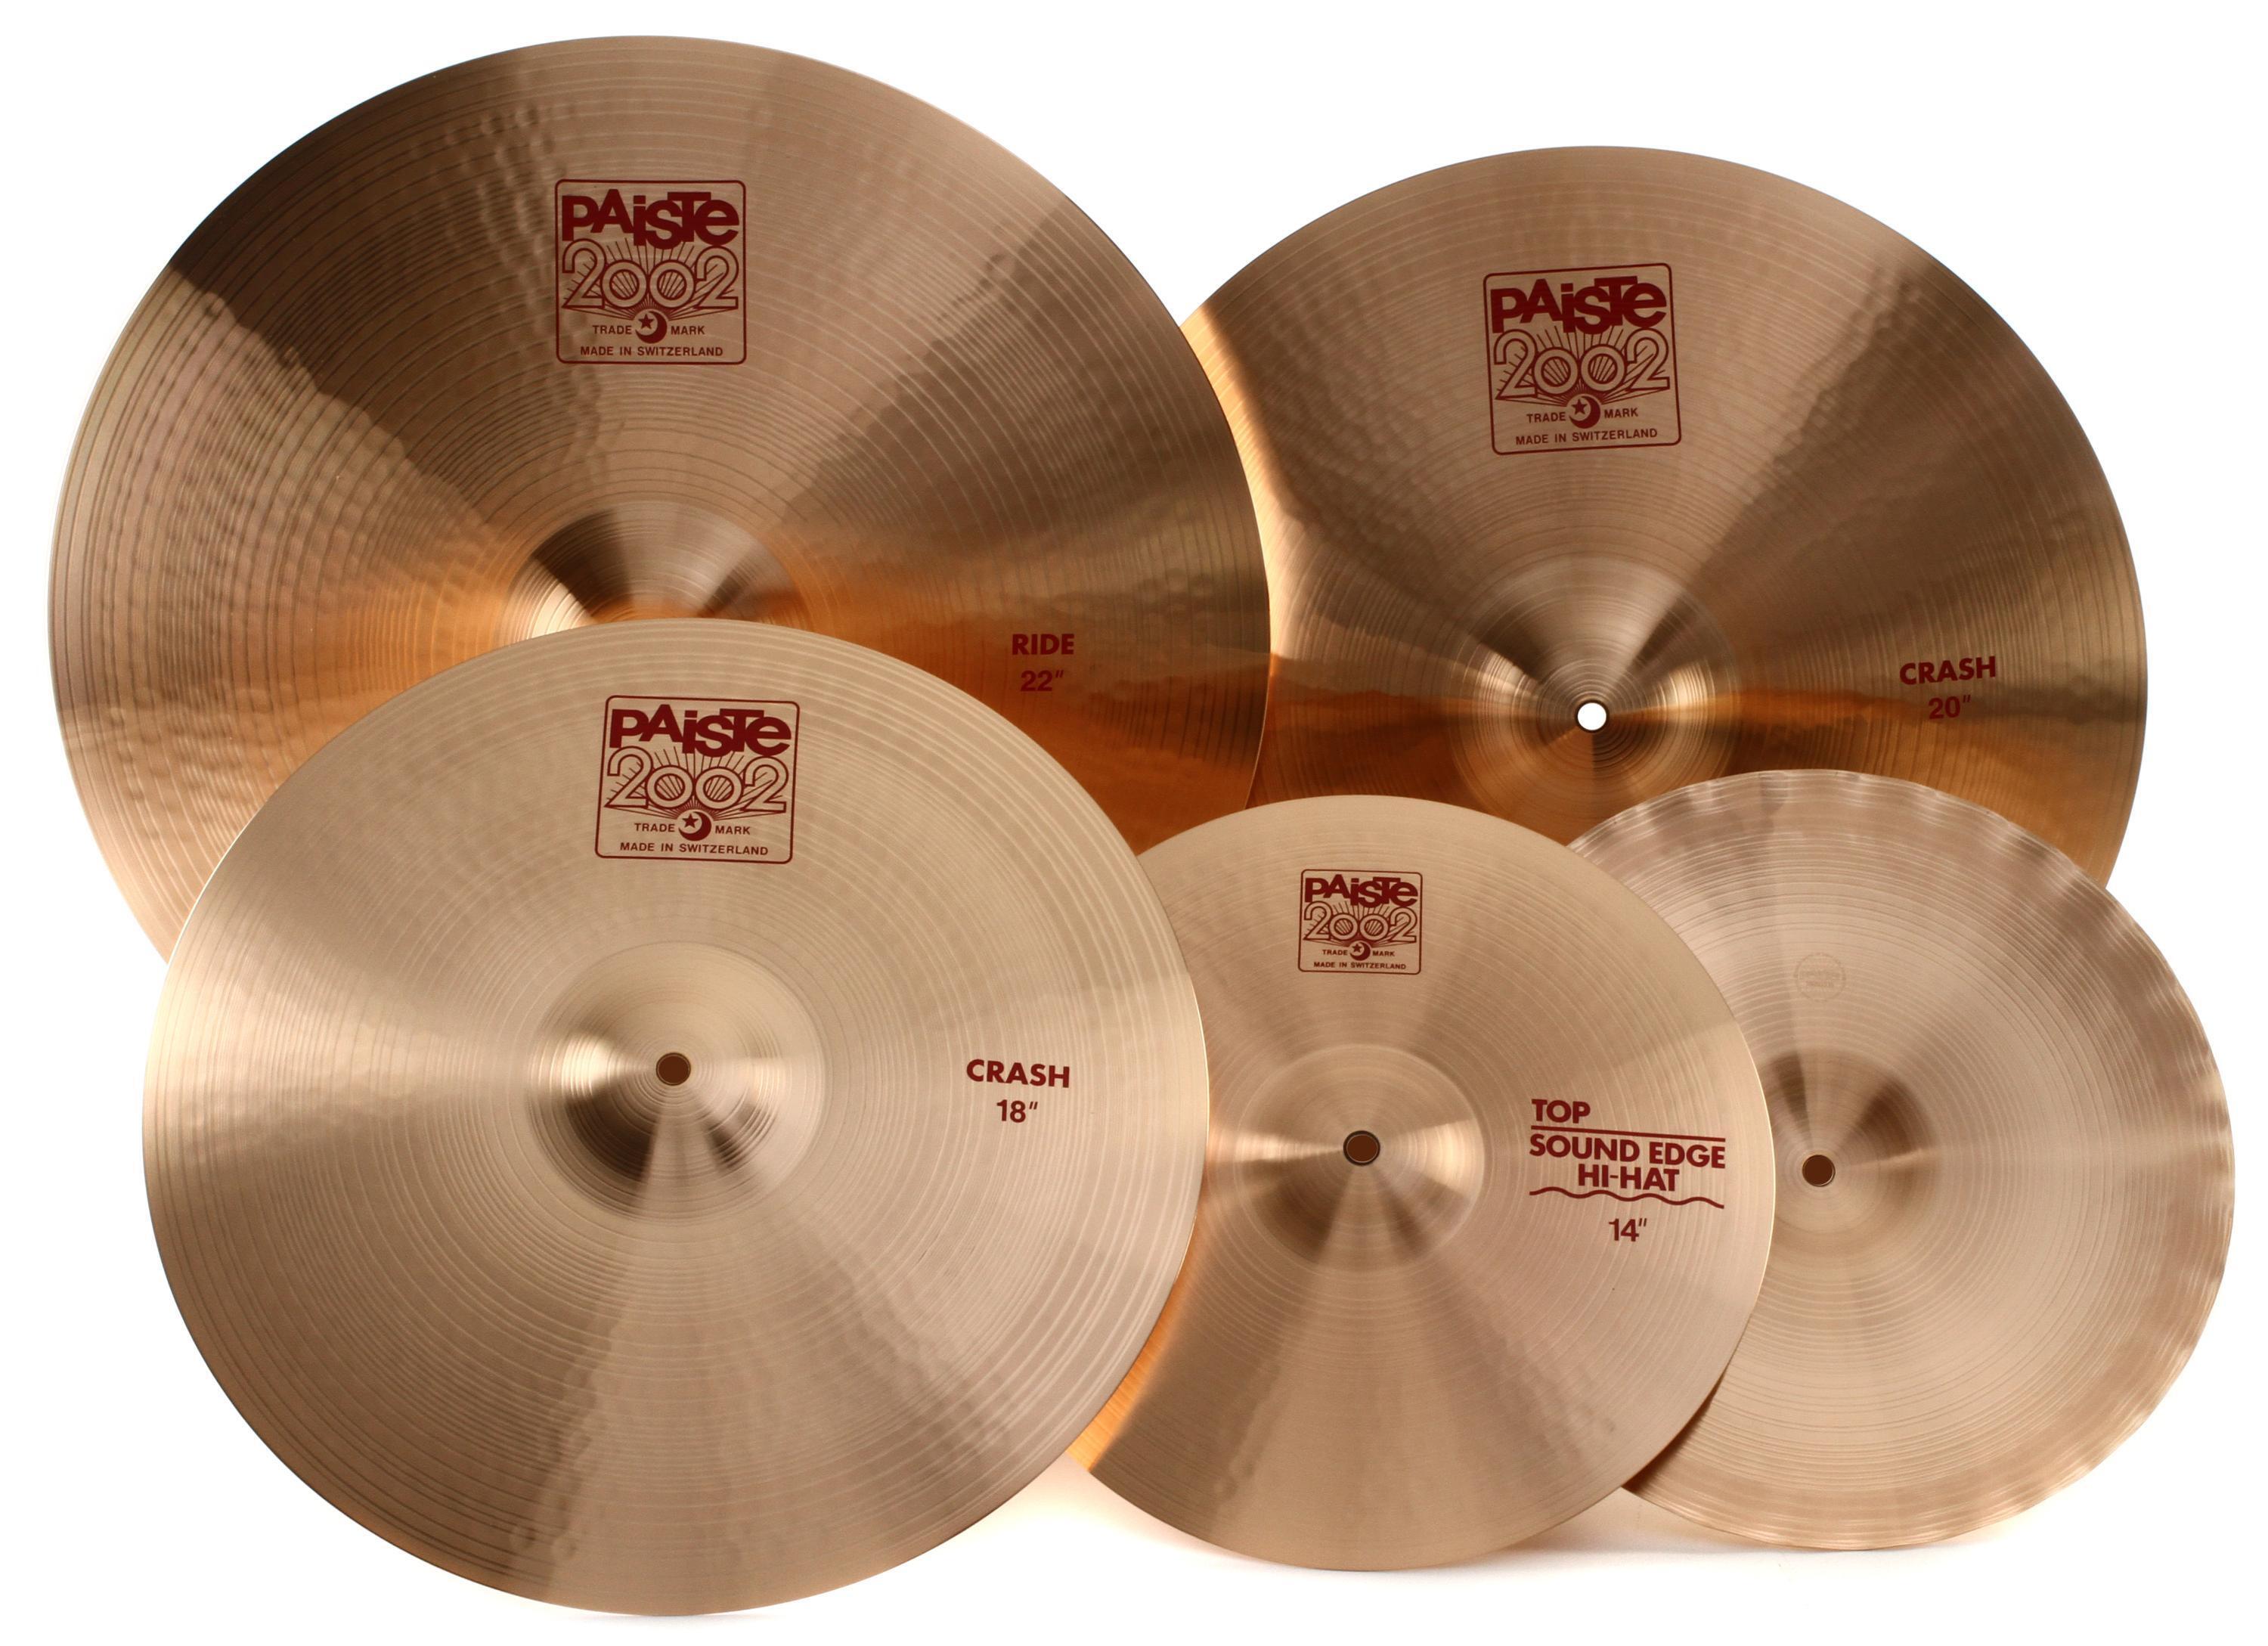 Paiste 2002 Cymbal Set - 14/20/22 inch- with Free 18 inch Crash